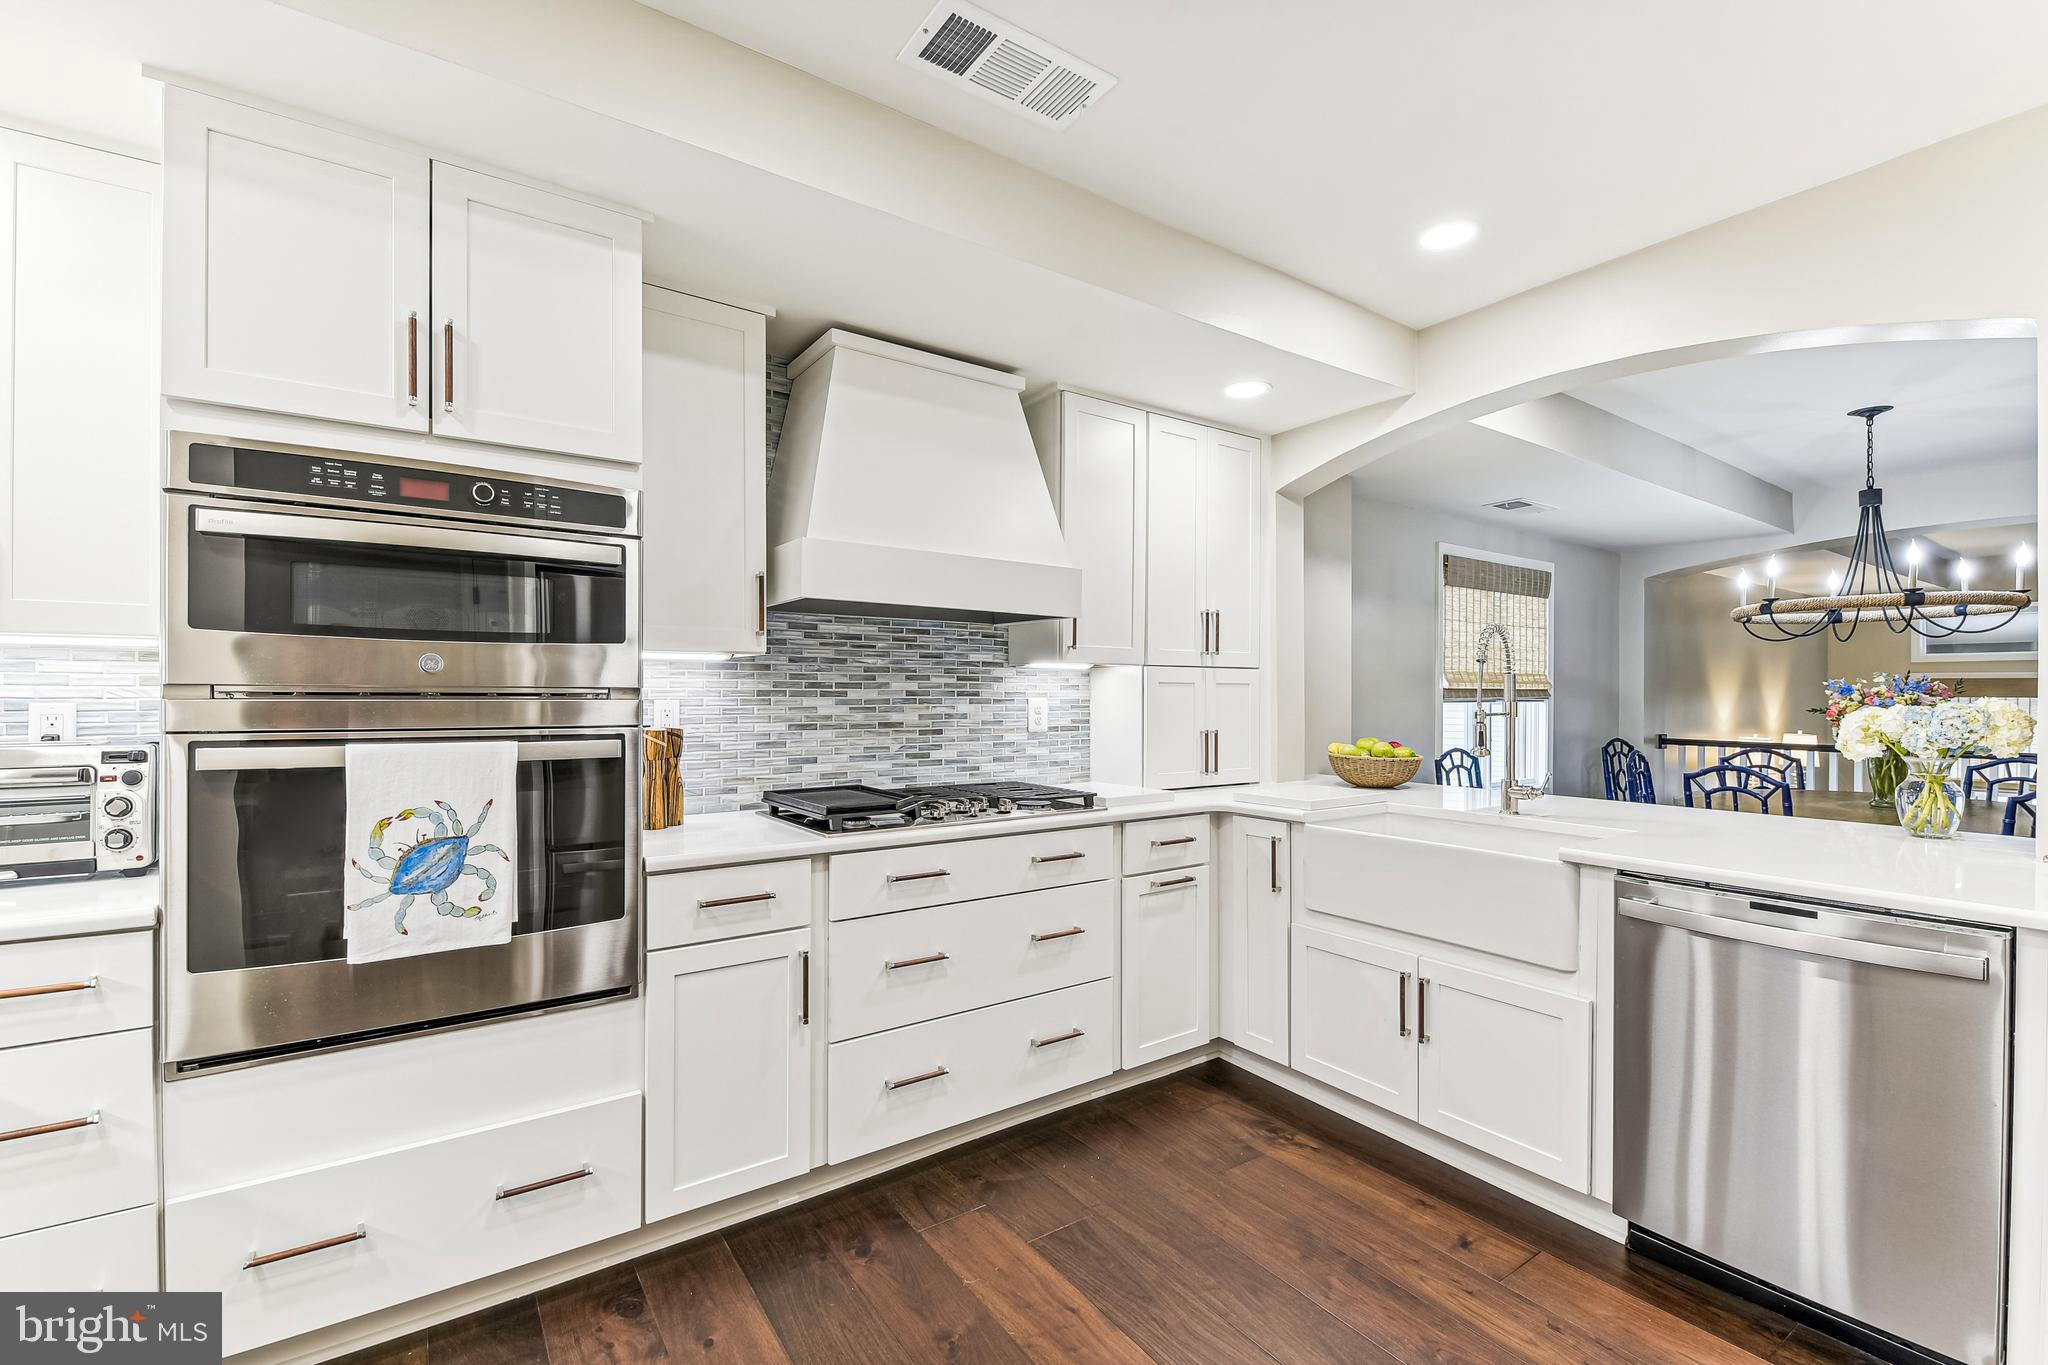 a kitchen with cabinets stainless steel appliances and wooden floor